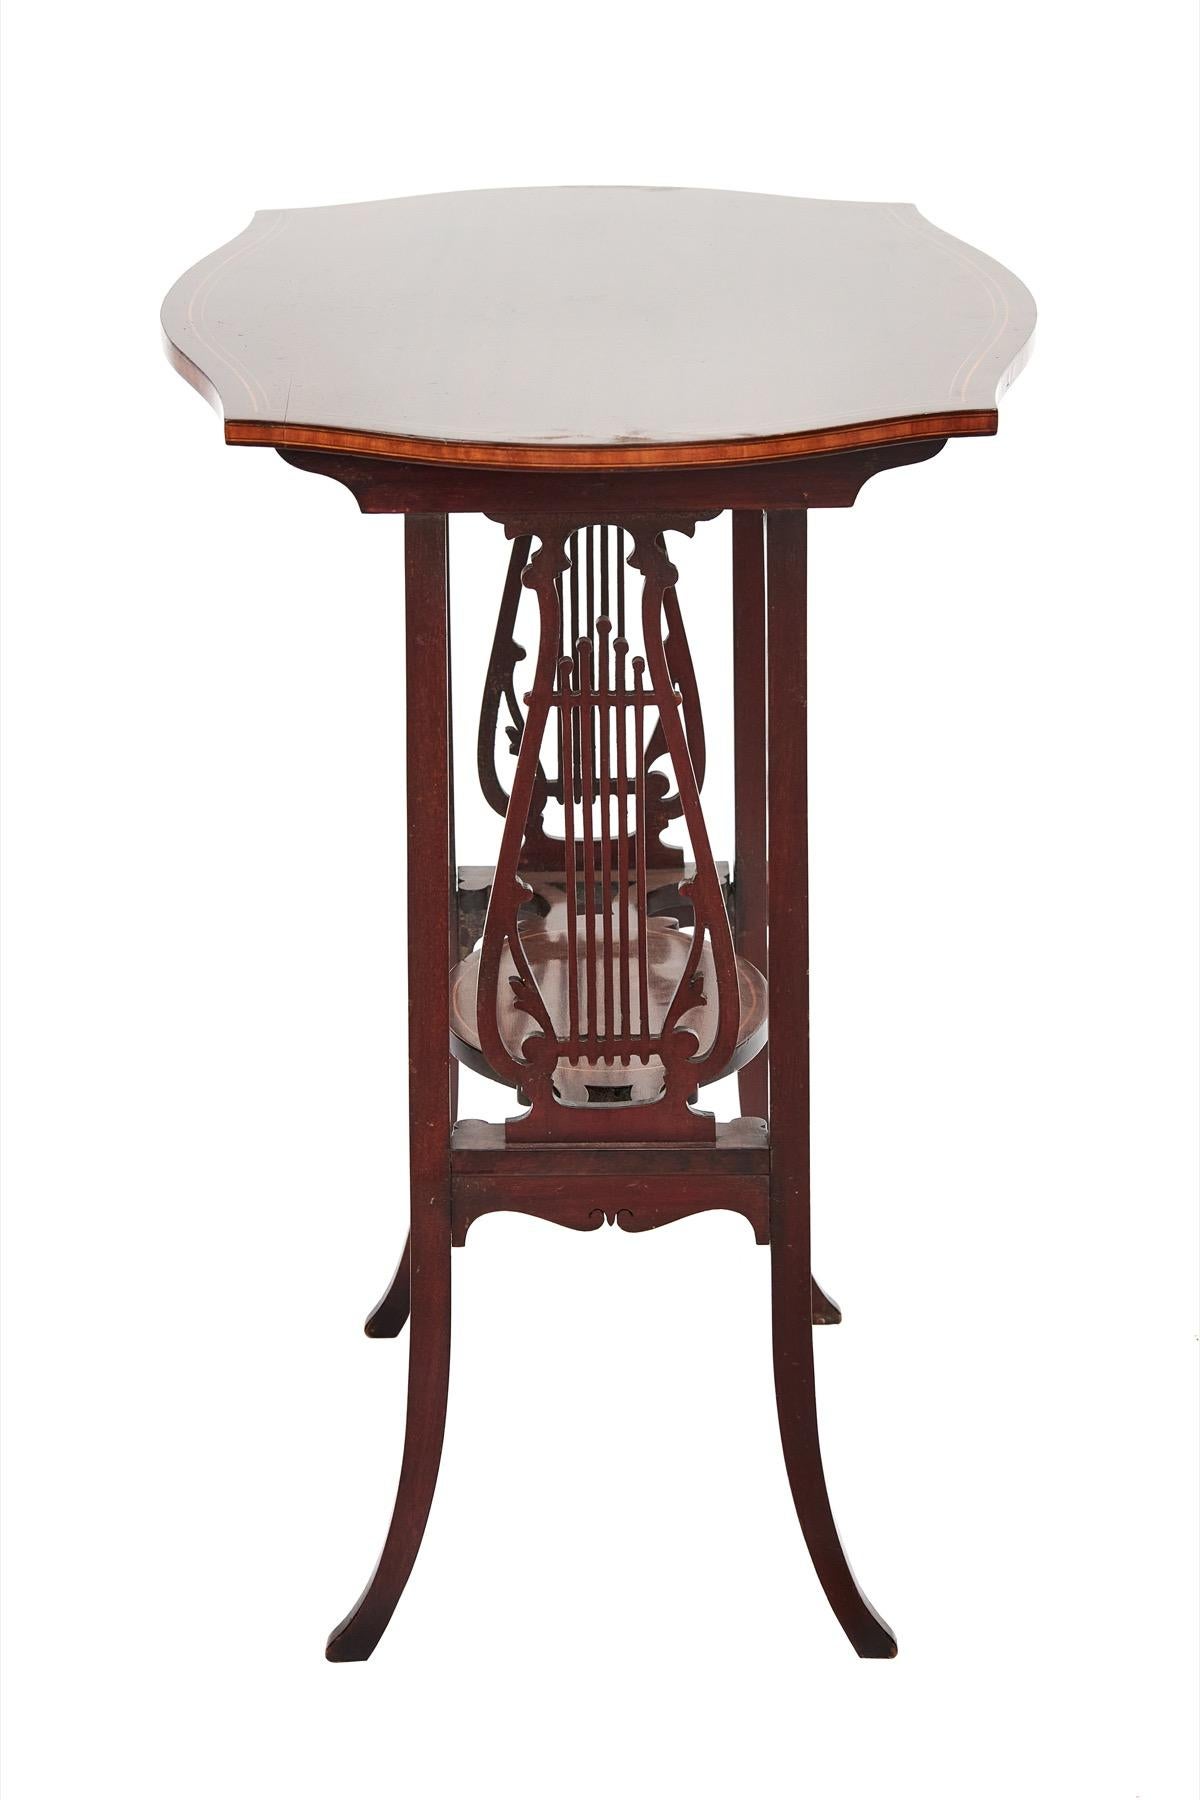 Polished Fine Sheraton Revival Mahogany Inlaid & carved Lyre end support table [A] For Sale